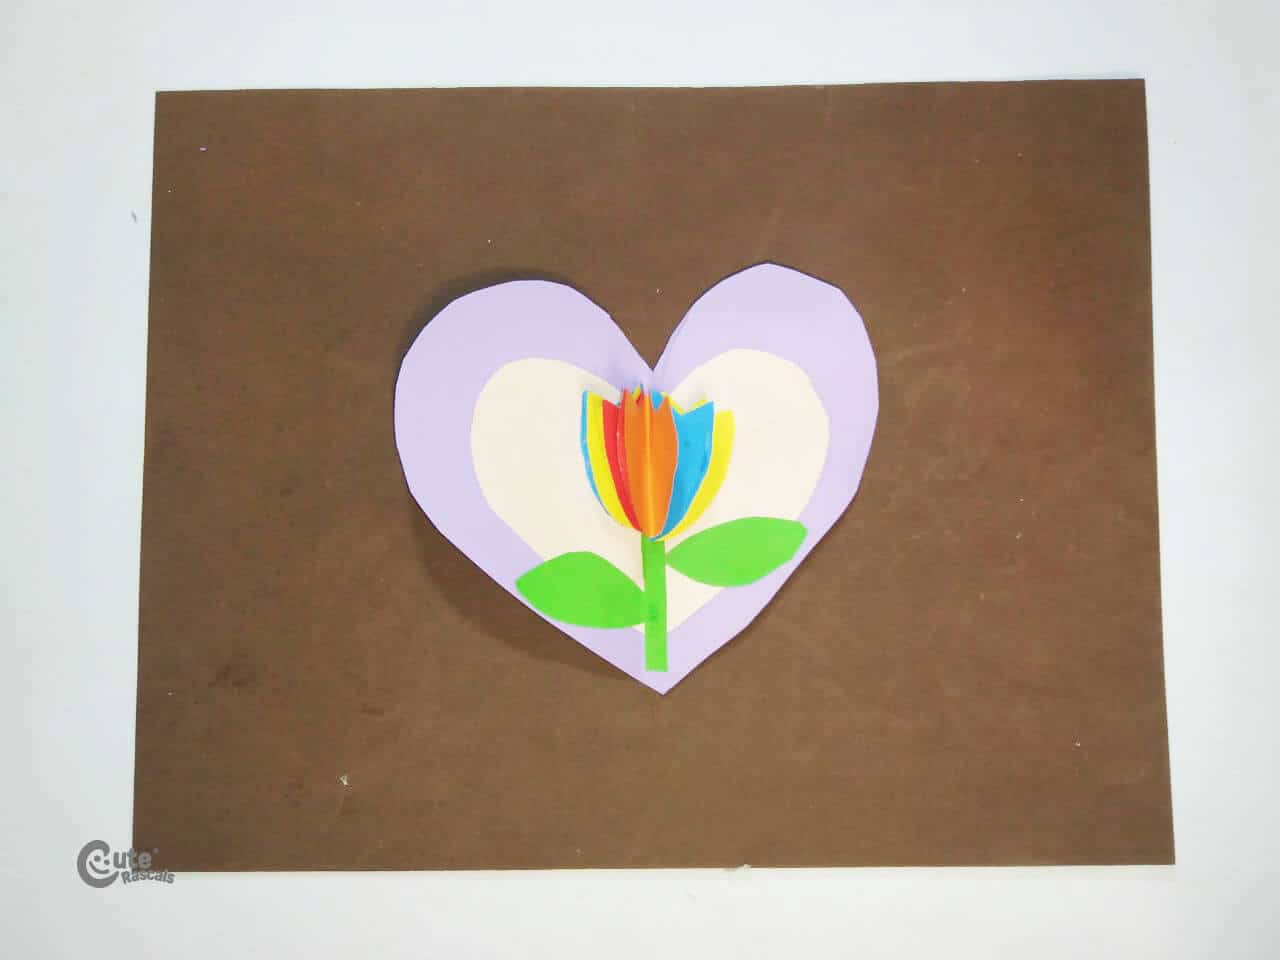 A super easy Valentines day card for kids. A home activity craft for preschoolers